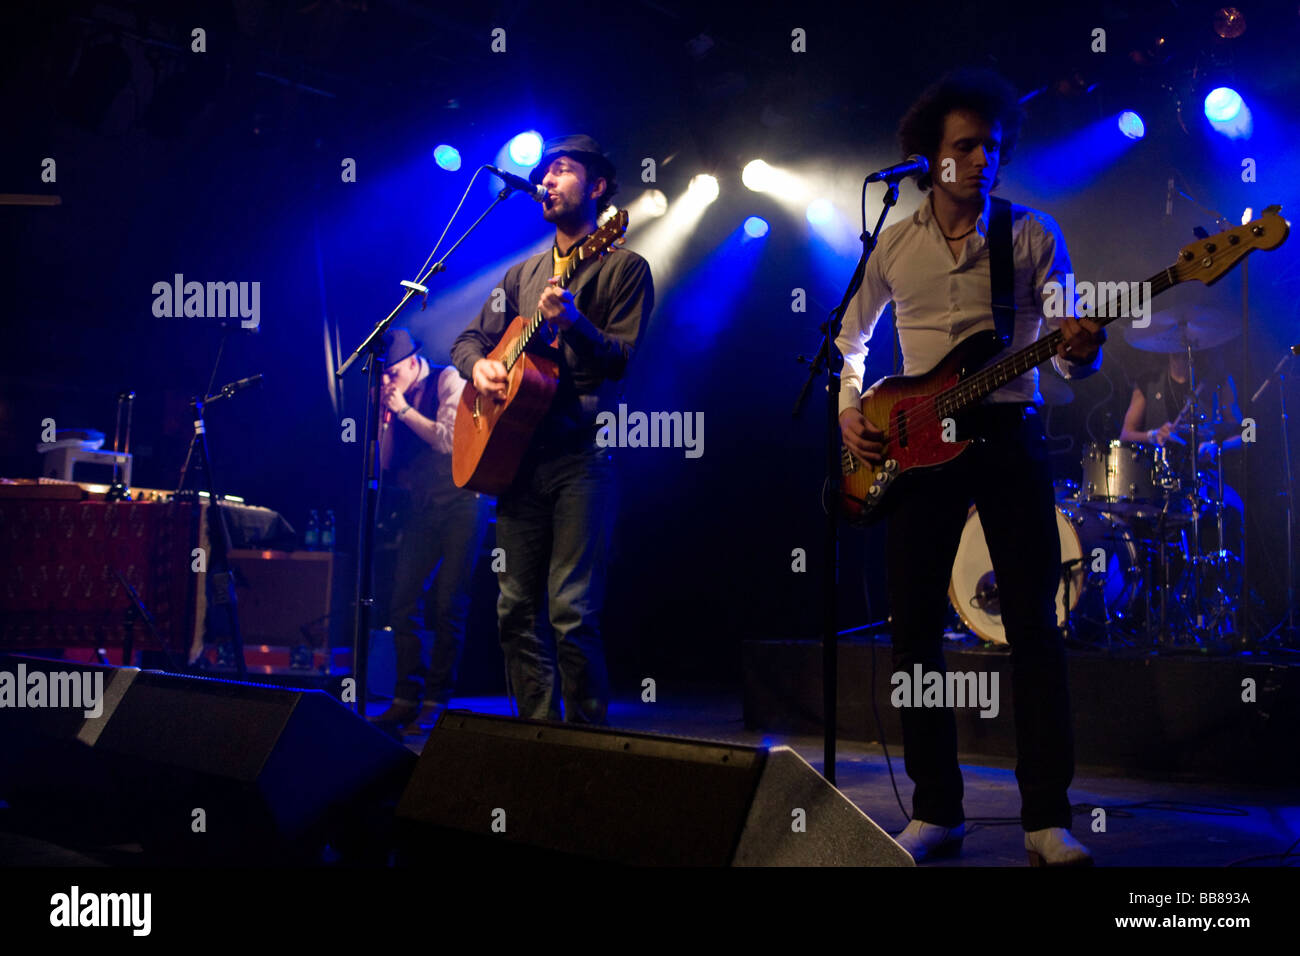 Charlie Winston, British singer and songwriter, performing live with ...